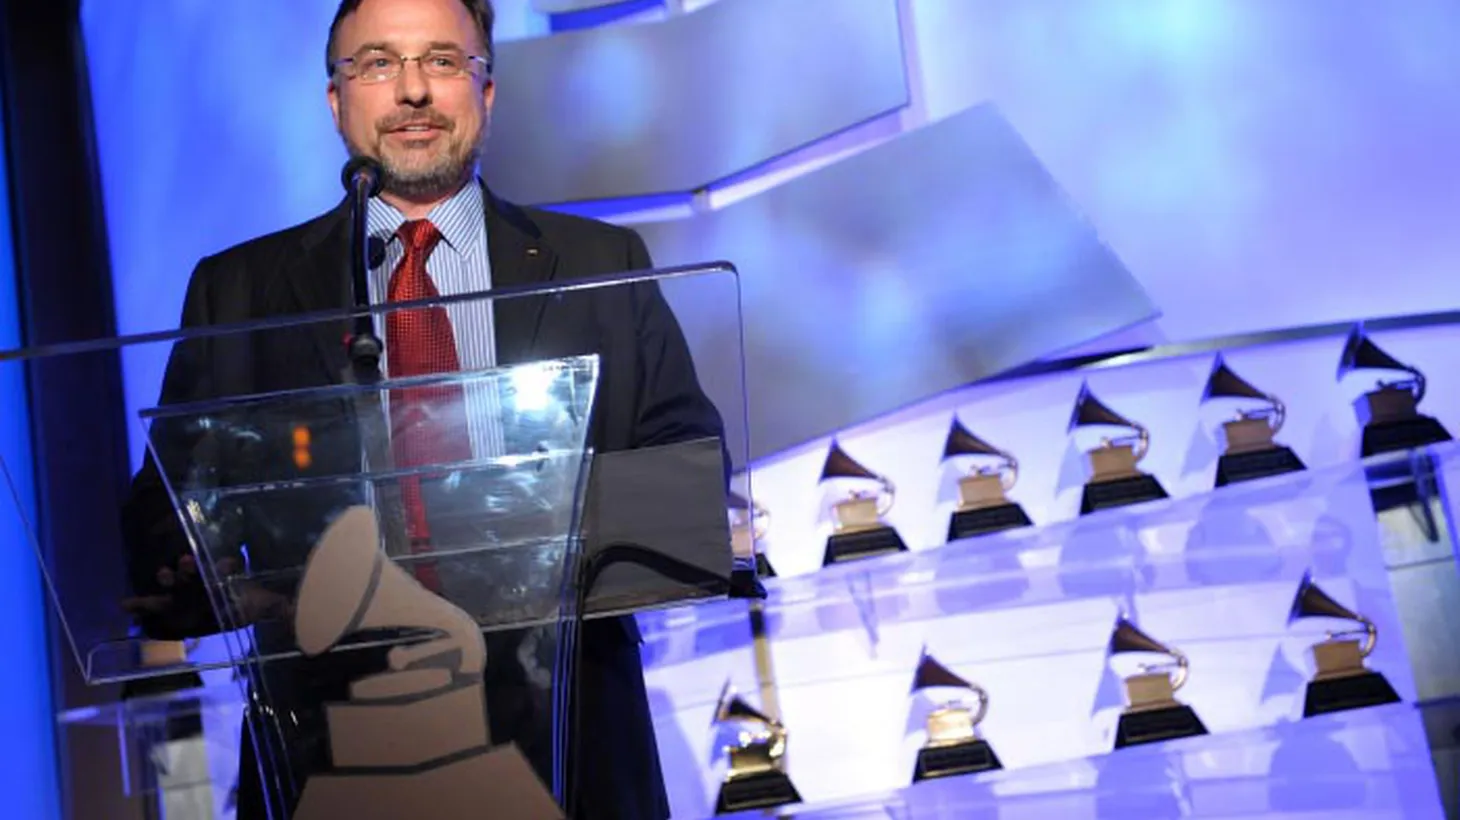 Bill Freimuth, Senior Vice President for The Recording Academy, joins Jason Bentley to discuss some of the recent changes happening to the Grammy Awards.